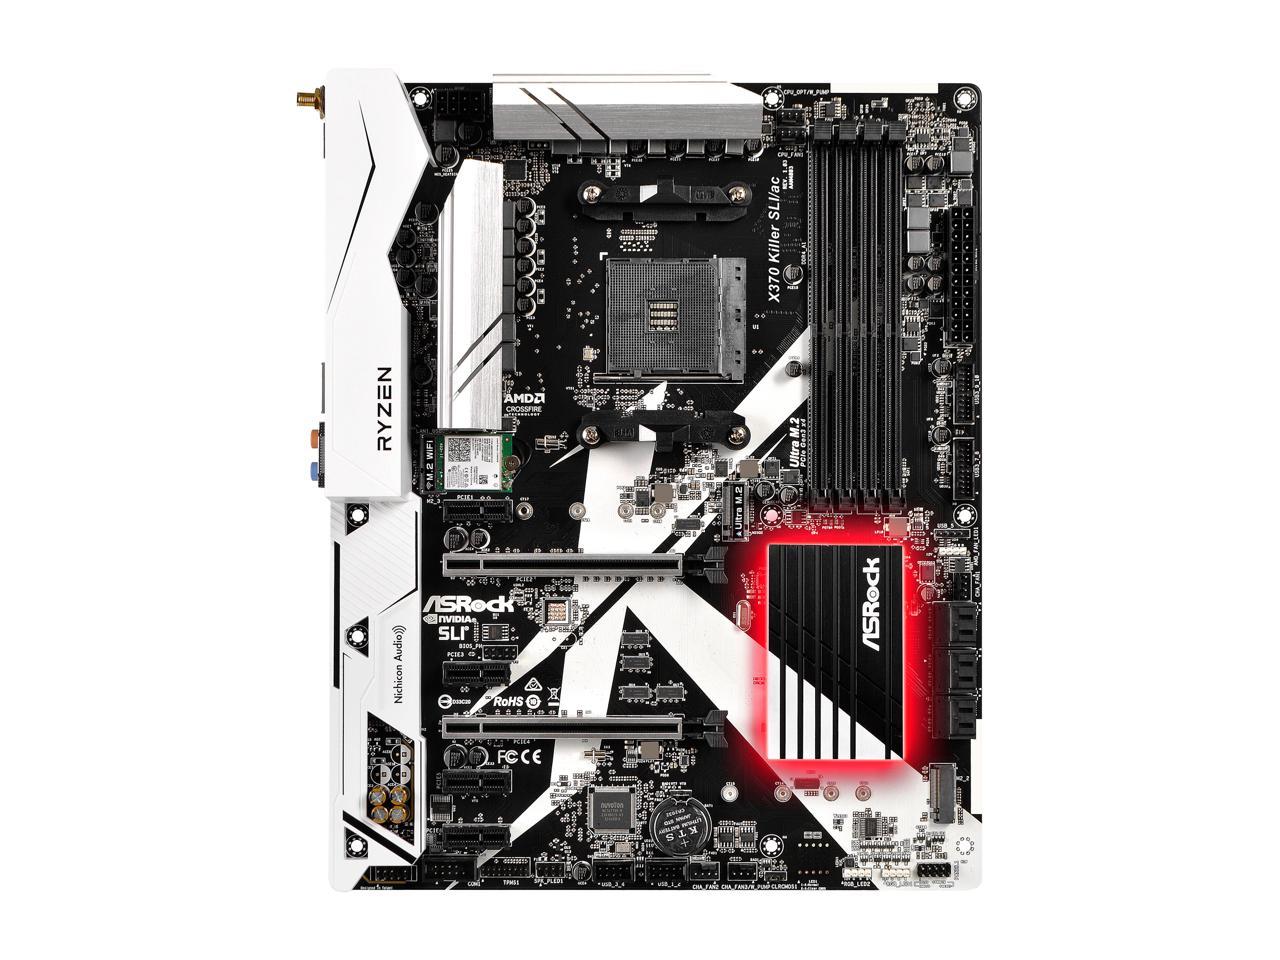 Is it me or are the new AM4 motherboards really over the top ugly